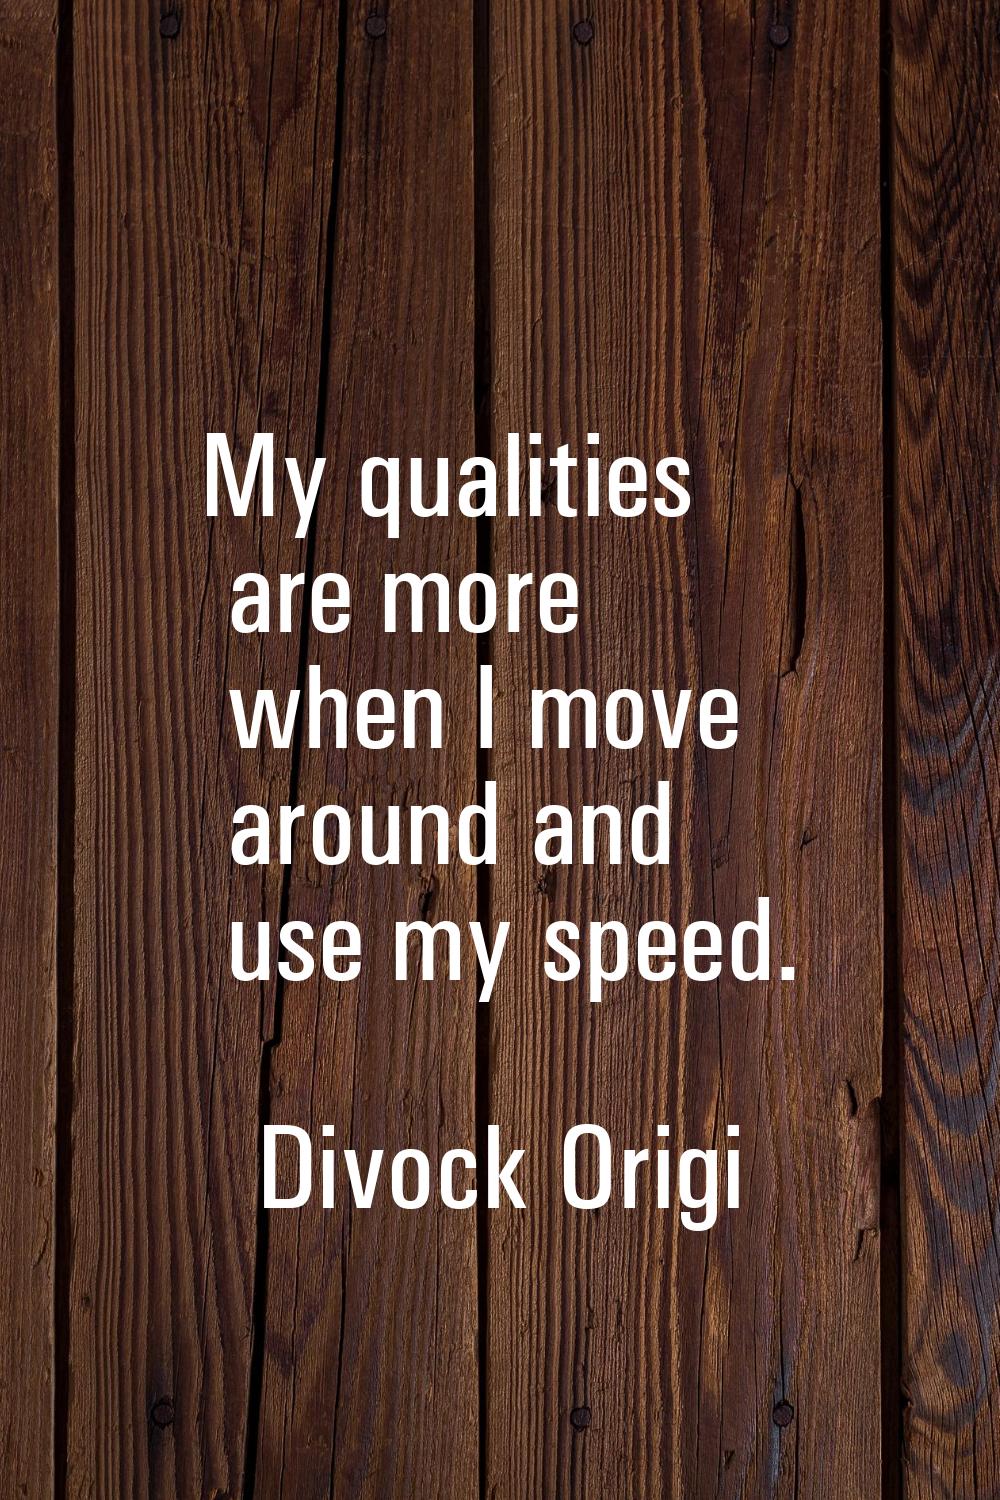 My qualities are more when I move around and use my speed.